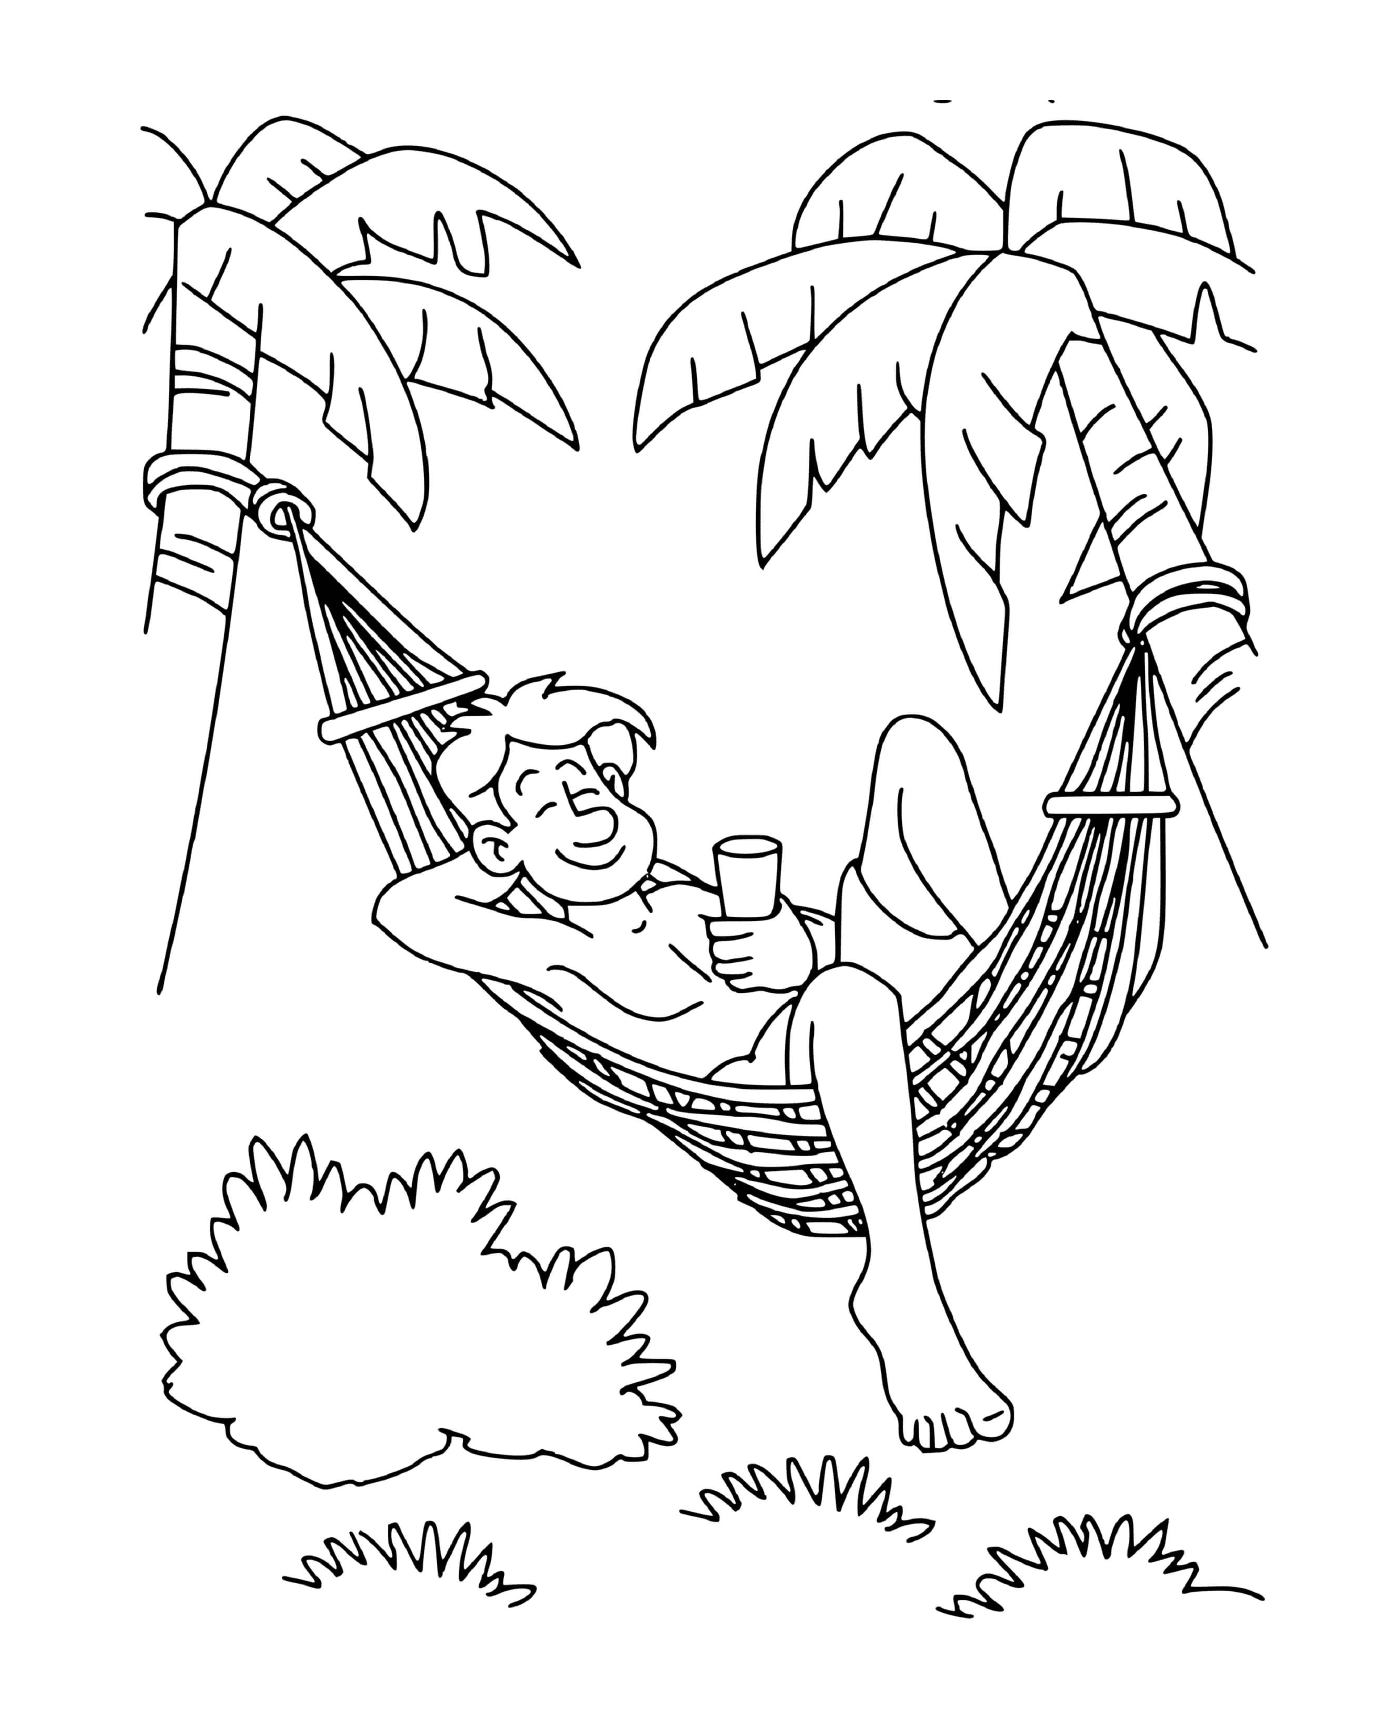  Dad's resting on a hammock with palm trees 